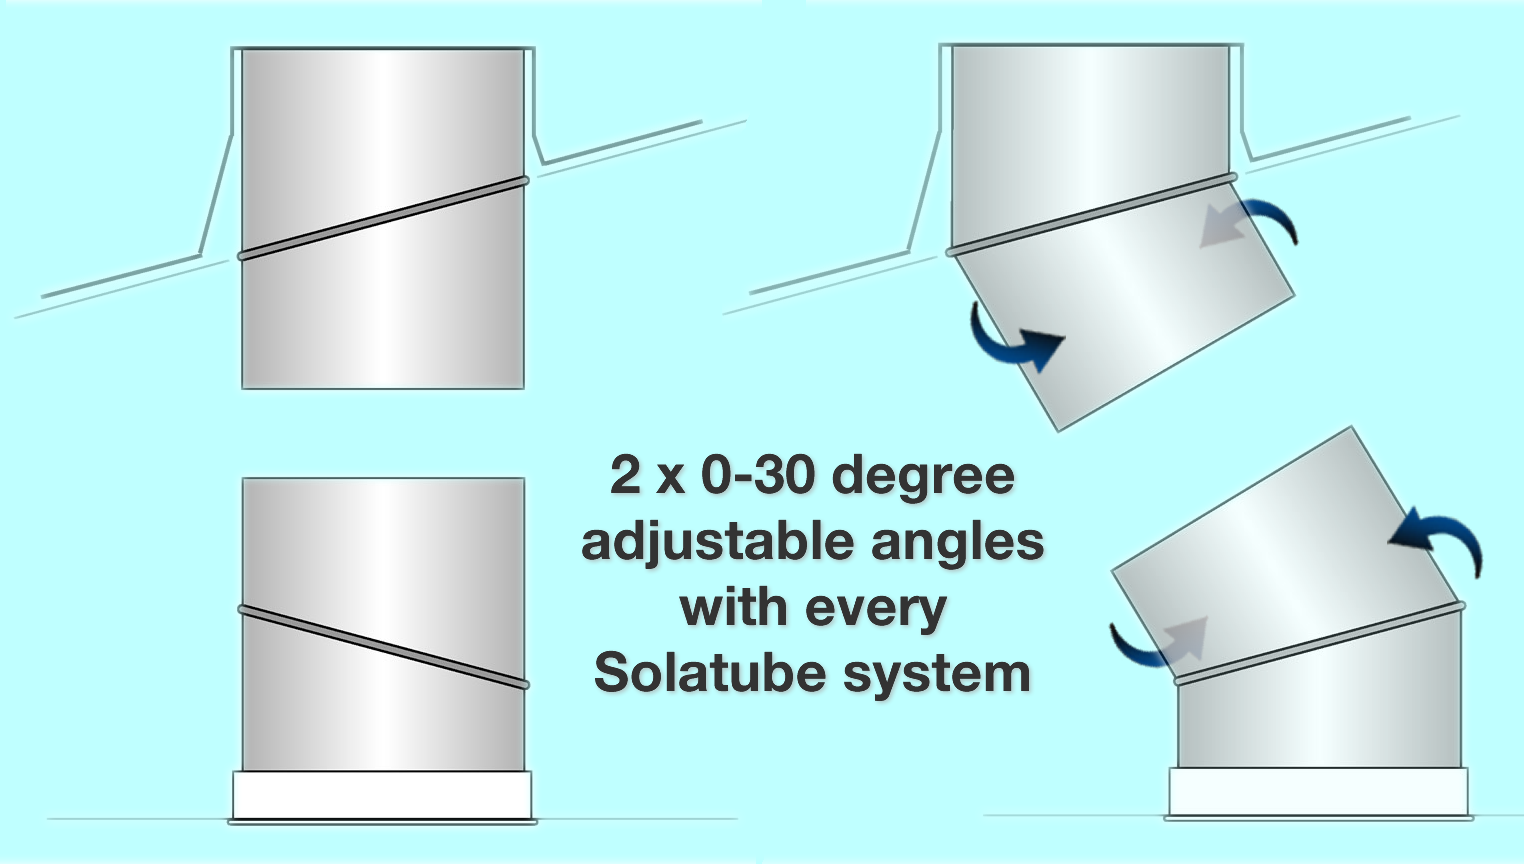 2 x 0-30 degree adjustable angles with every Solatube system diagram